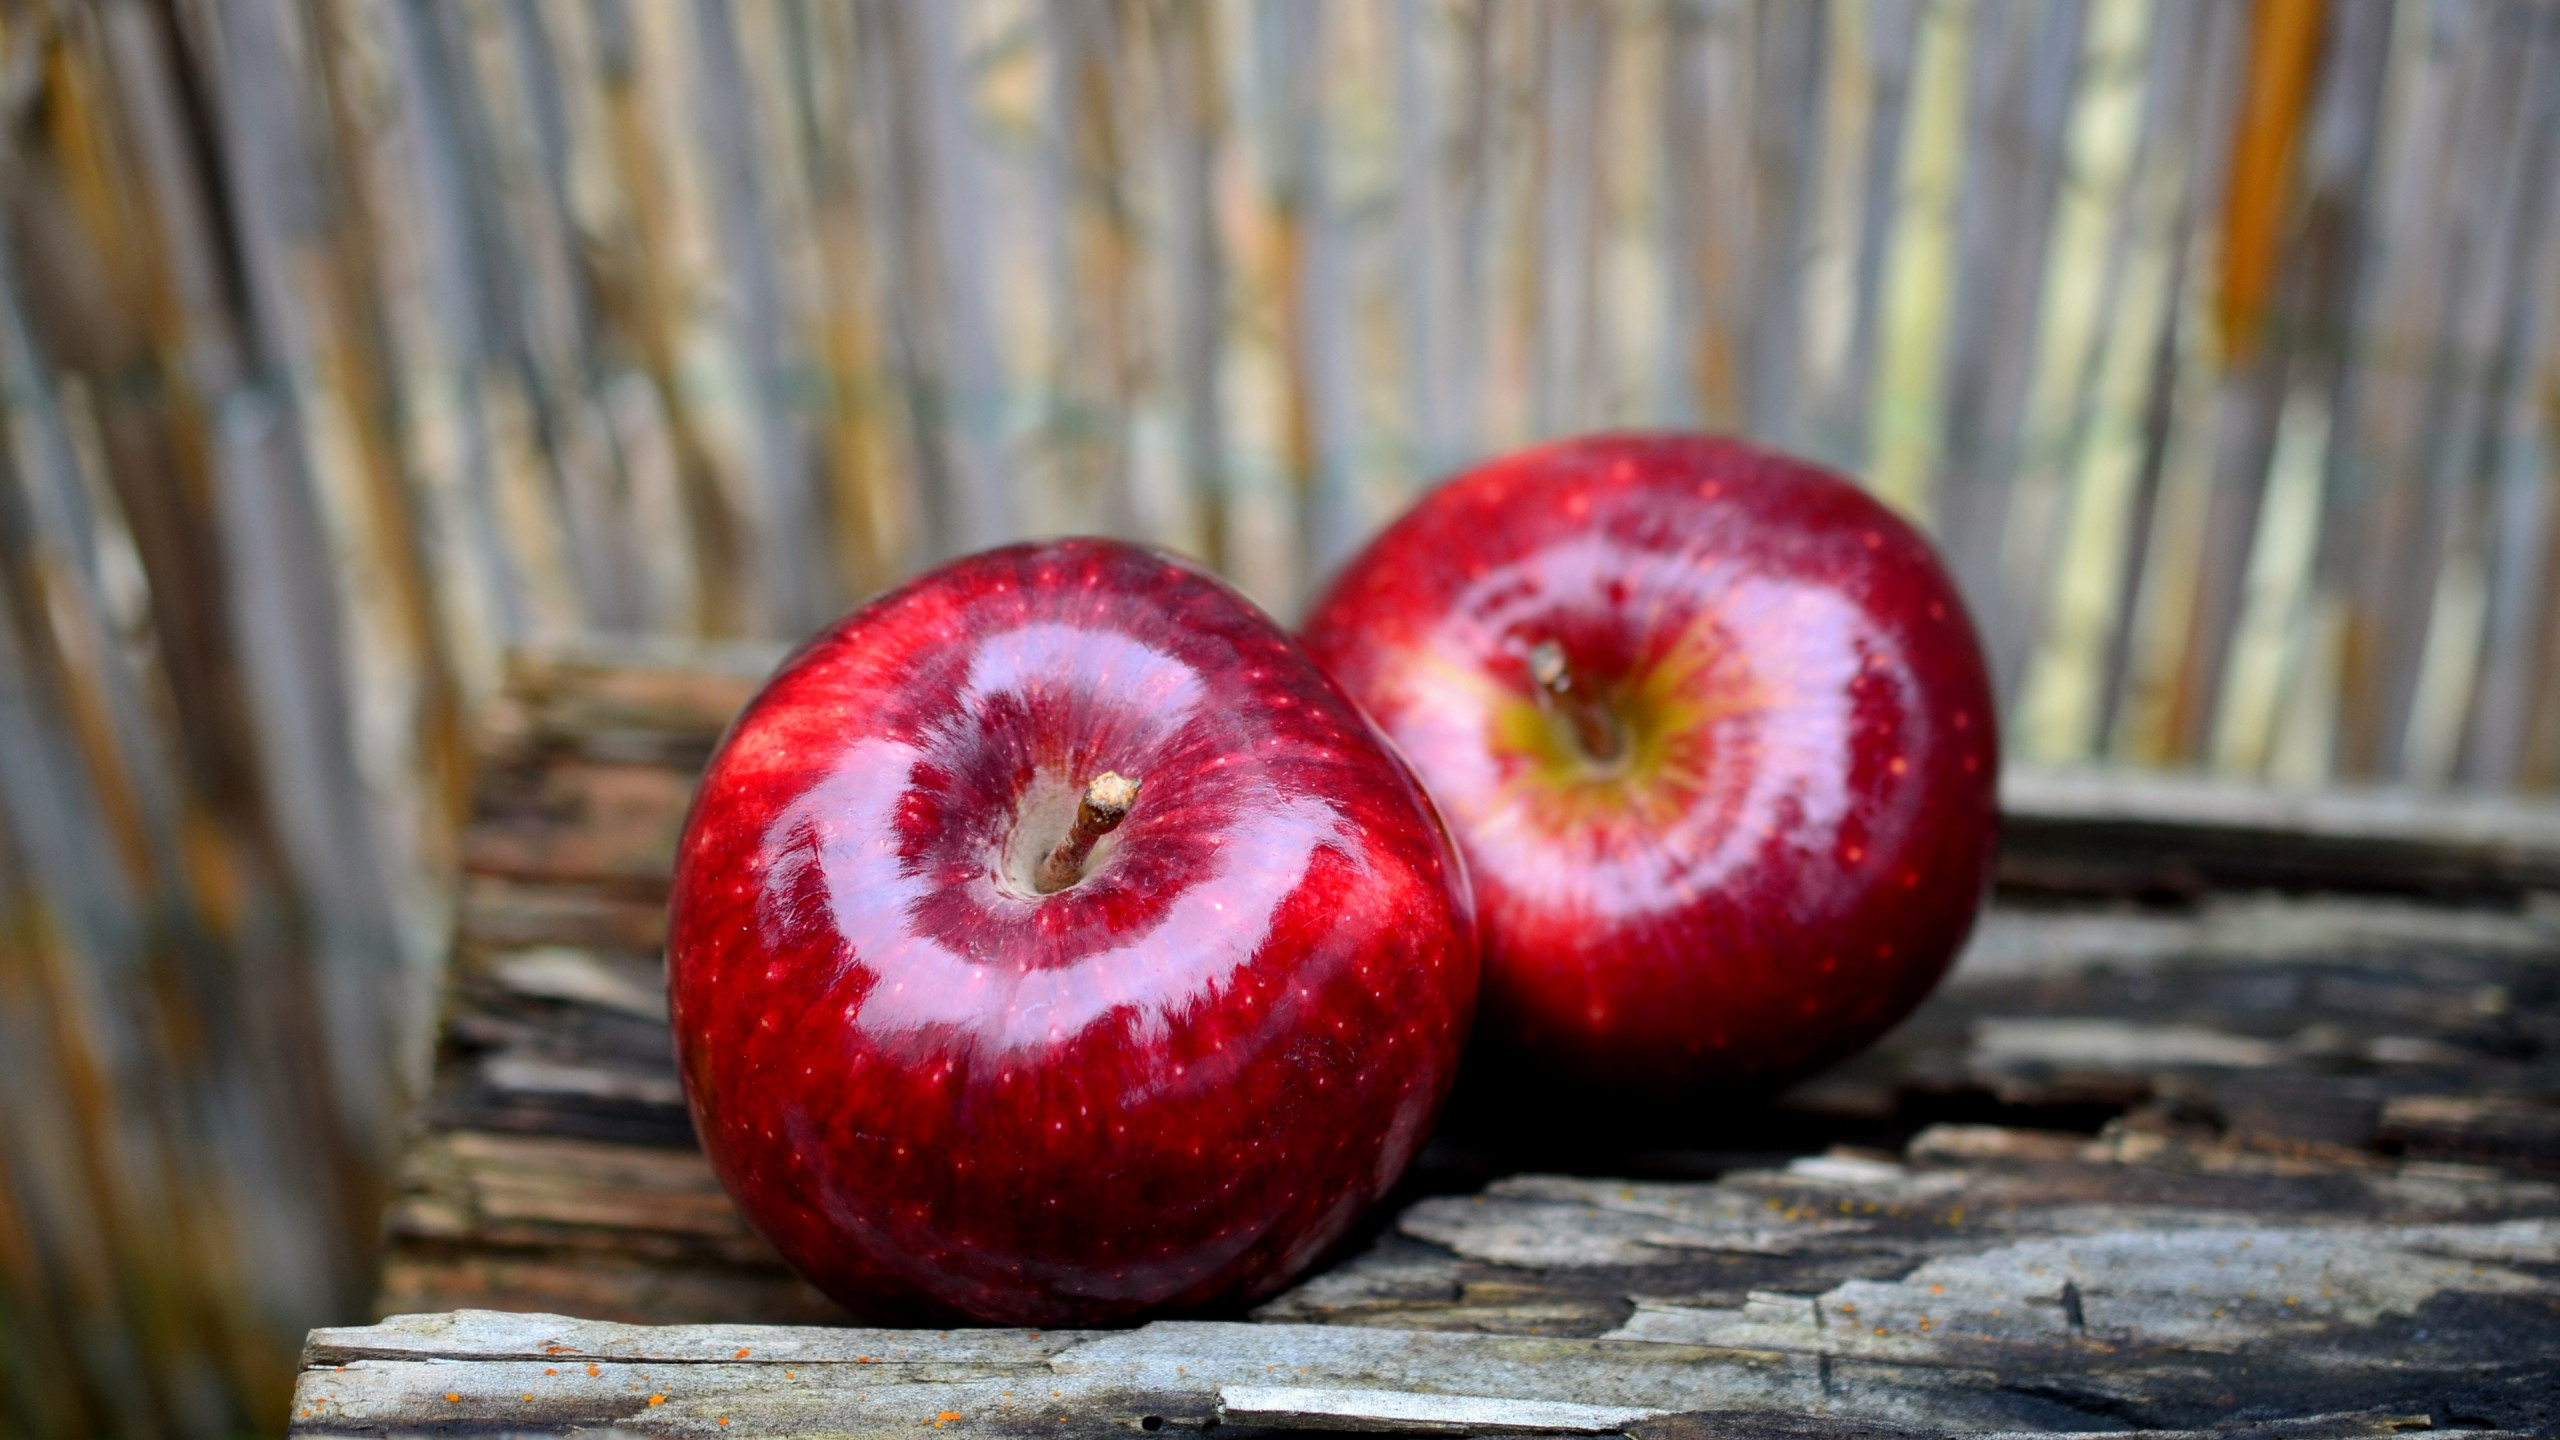 Delicious red apples wallpaper 2560x1440